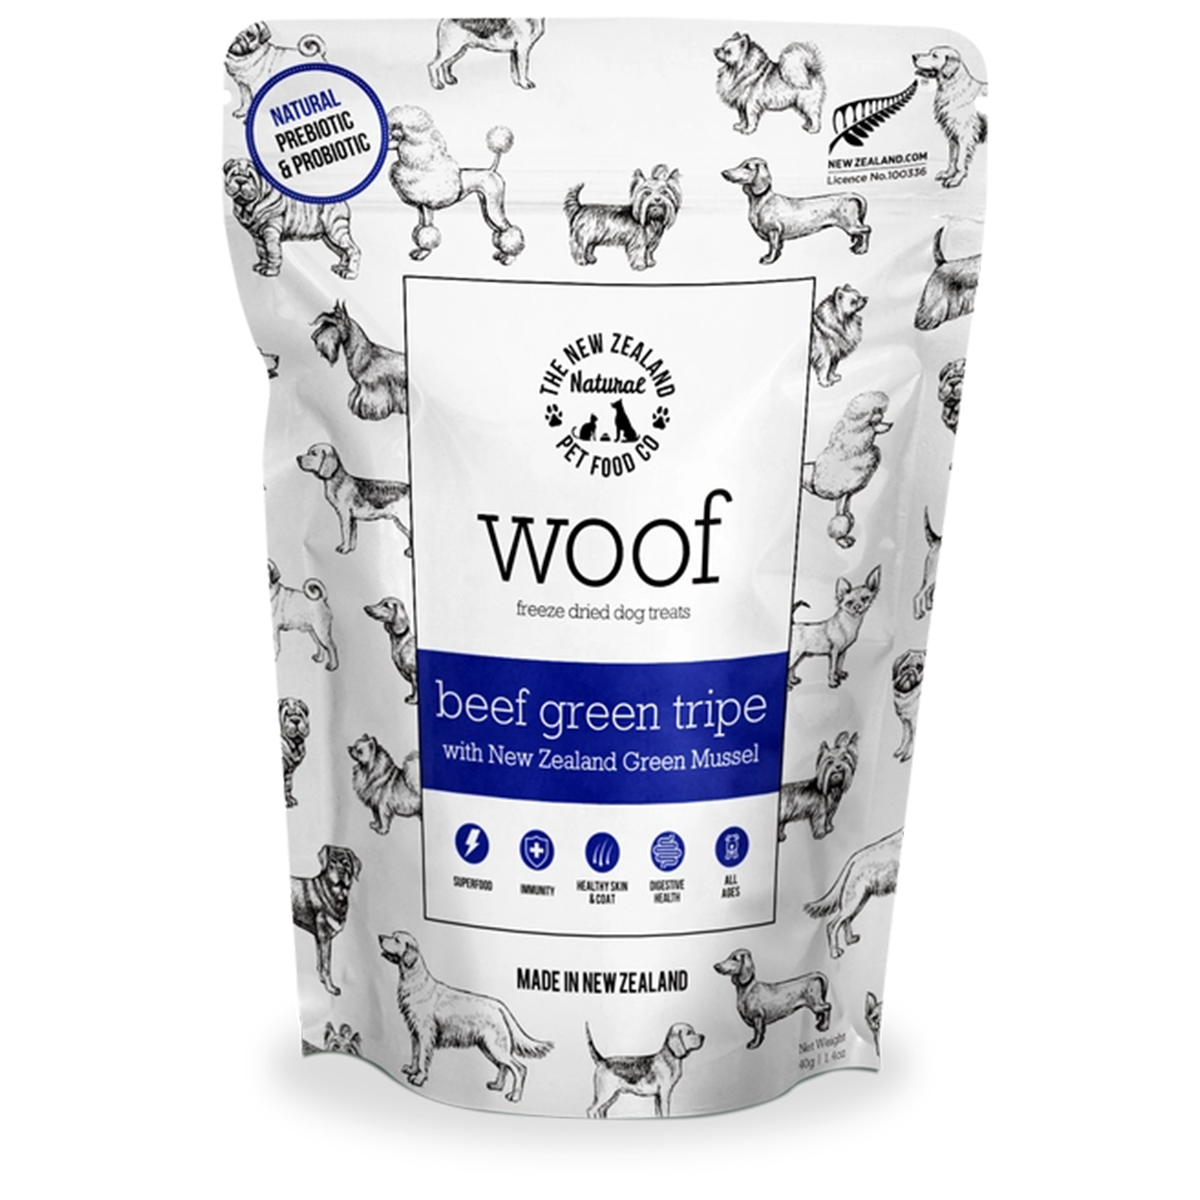 The New Zealand Natural Pet Food Co. Woof Freeze Dried Dog Treats - Beef Green Tripe